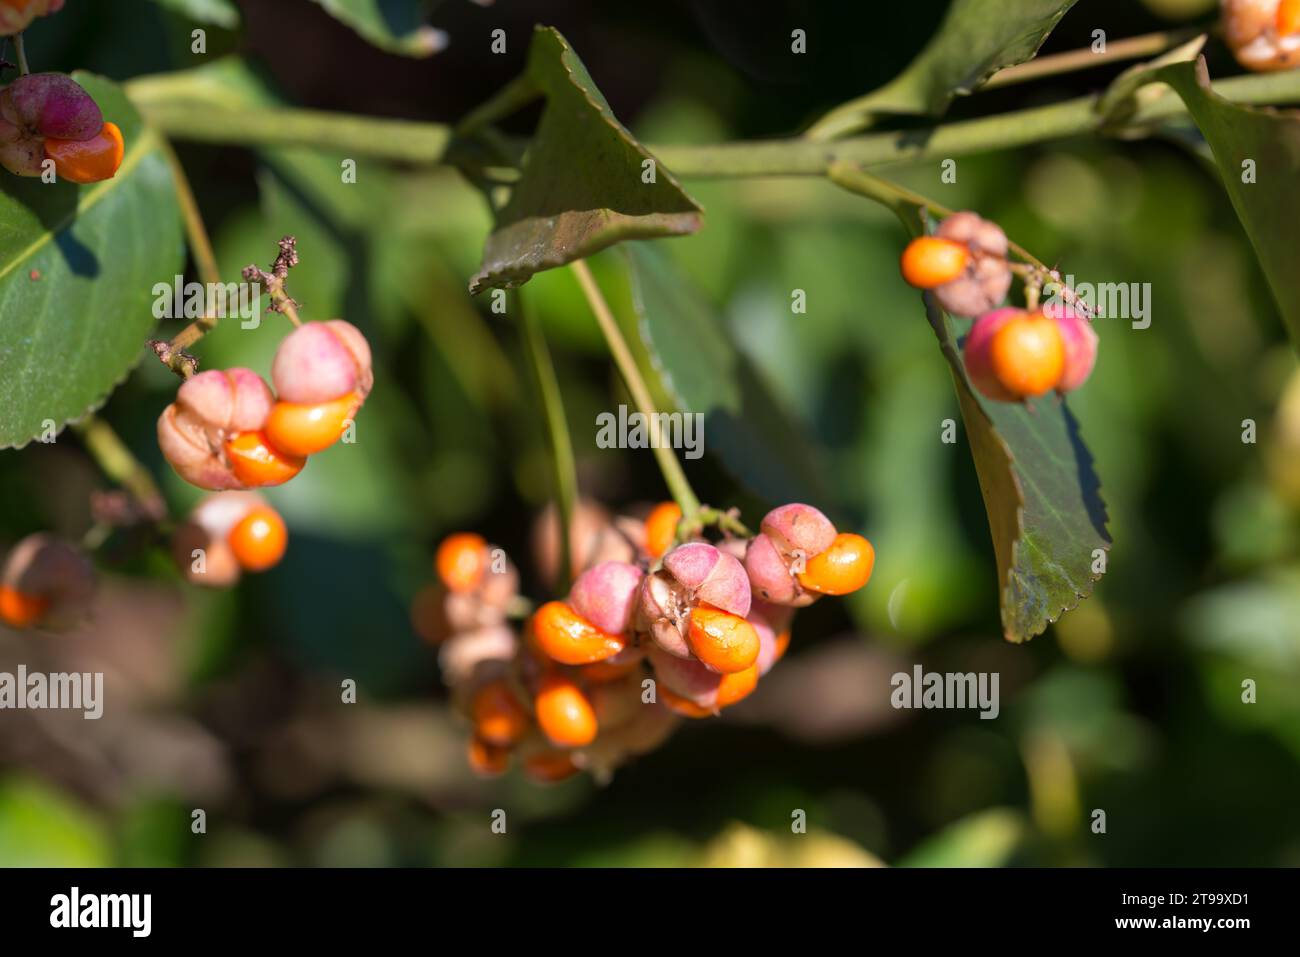 Fortune's spindle,  Euonymus fortunei on twig fruits closeup selective focus Stock Photo